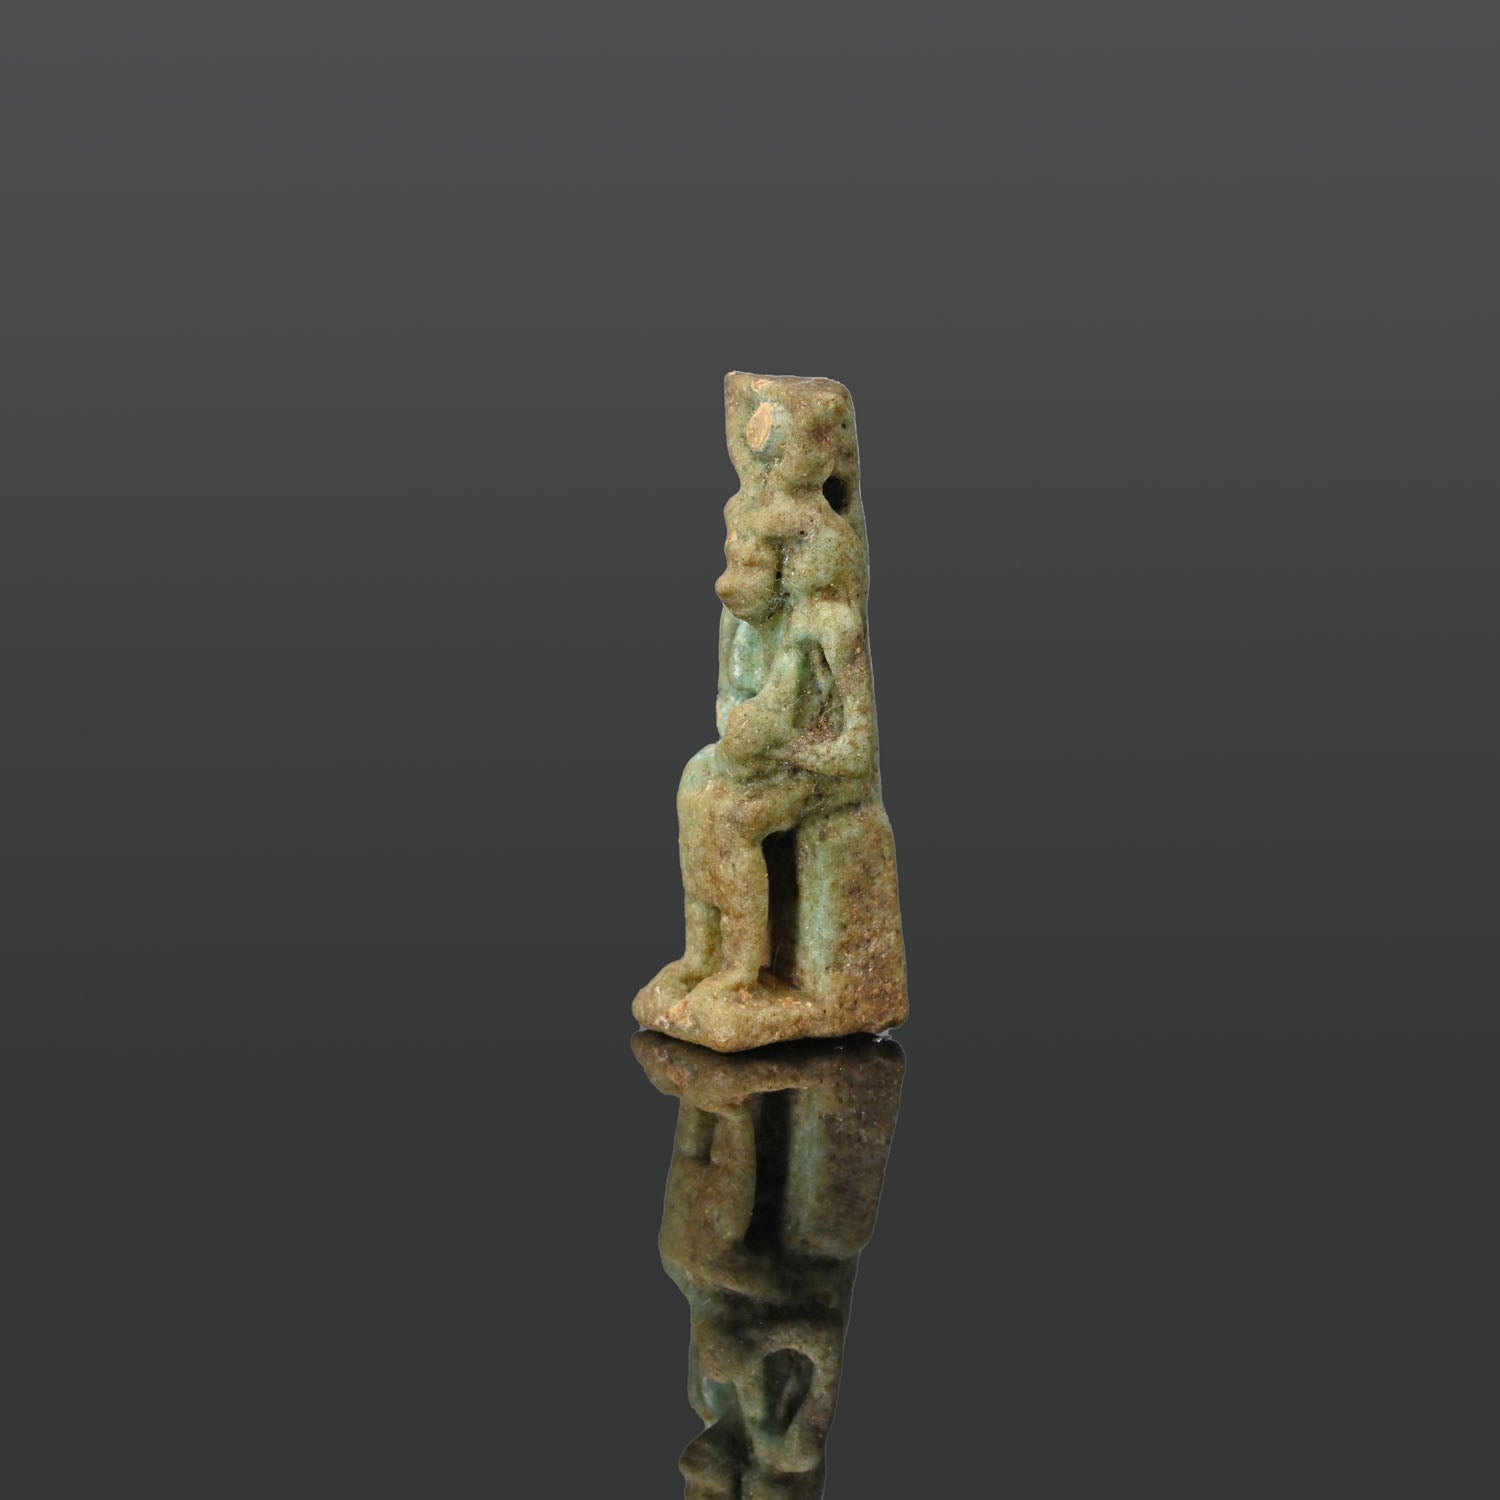 An Egyptian Faience Amulet of Isis-Hathor, Late Period, ca. 664 - 332 BCE